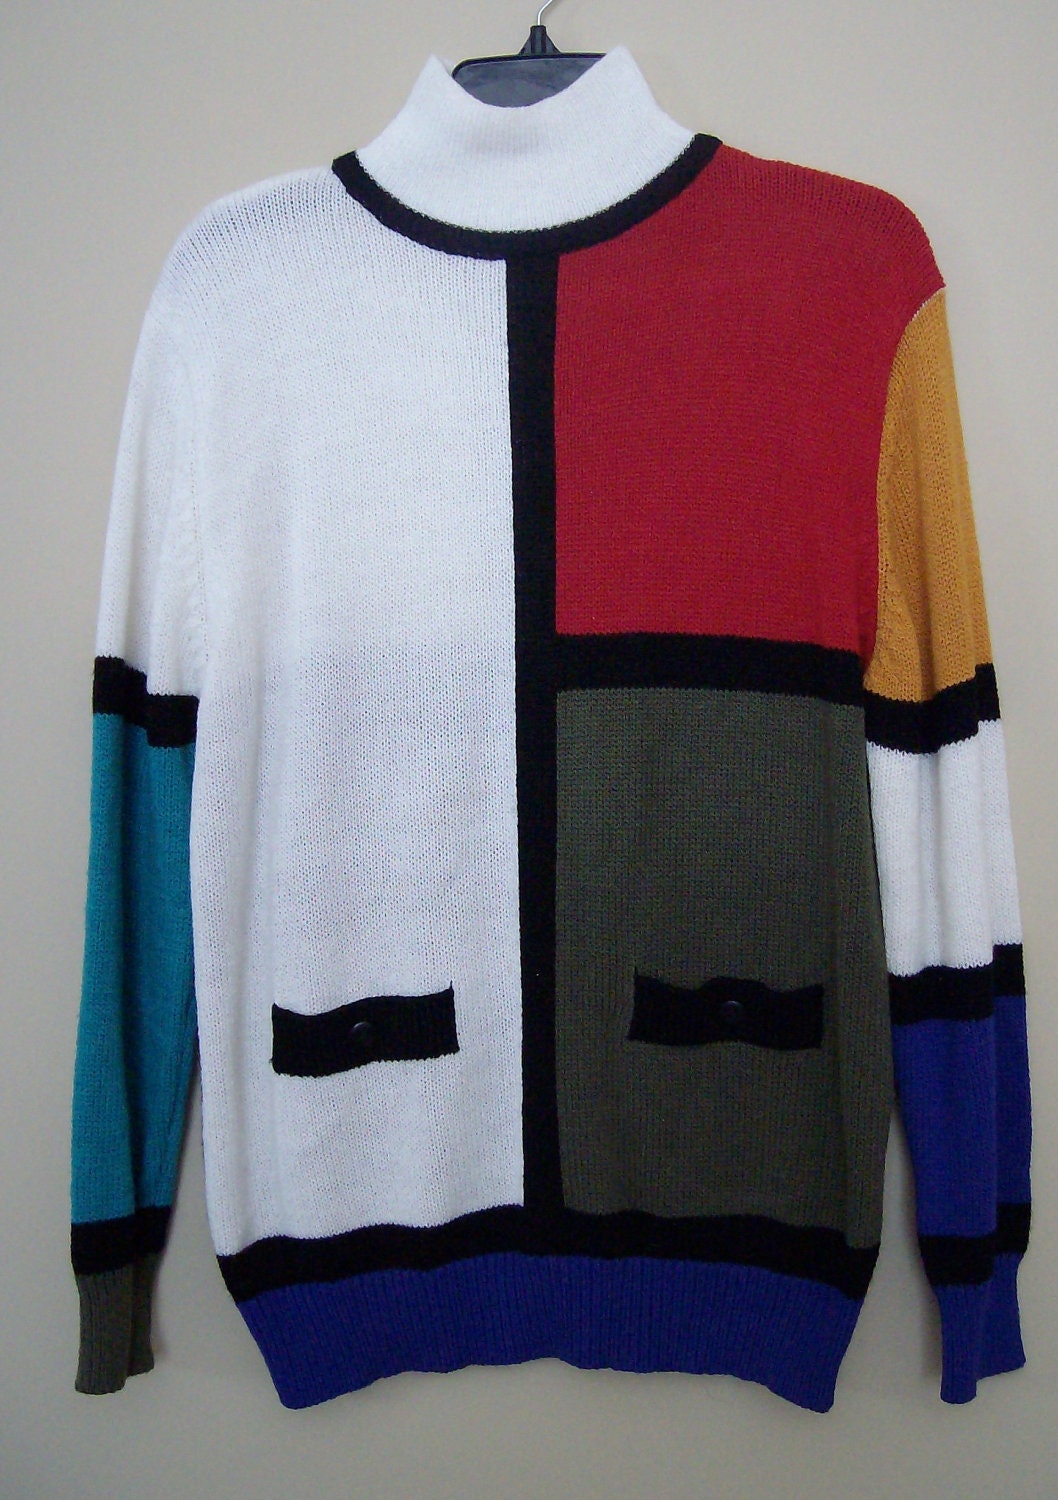 Mondrian Inspired Color Block Sweater by TCollinsArt on Etsy